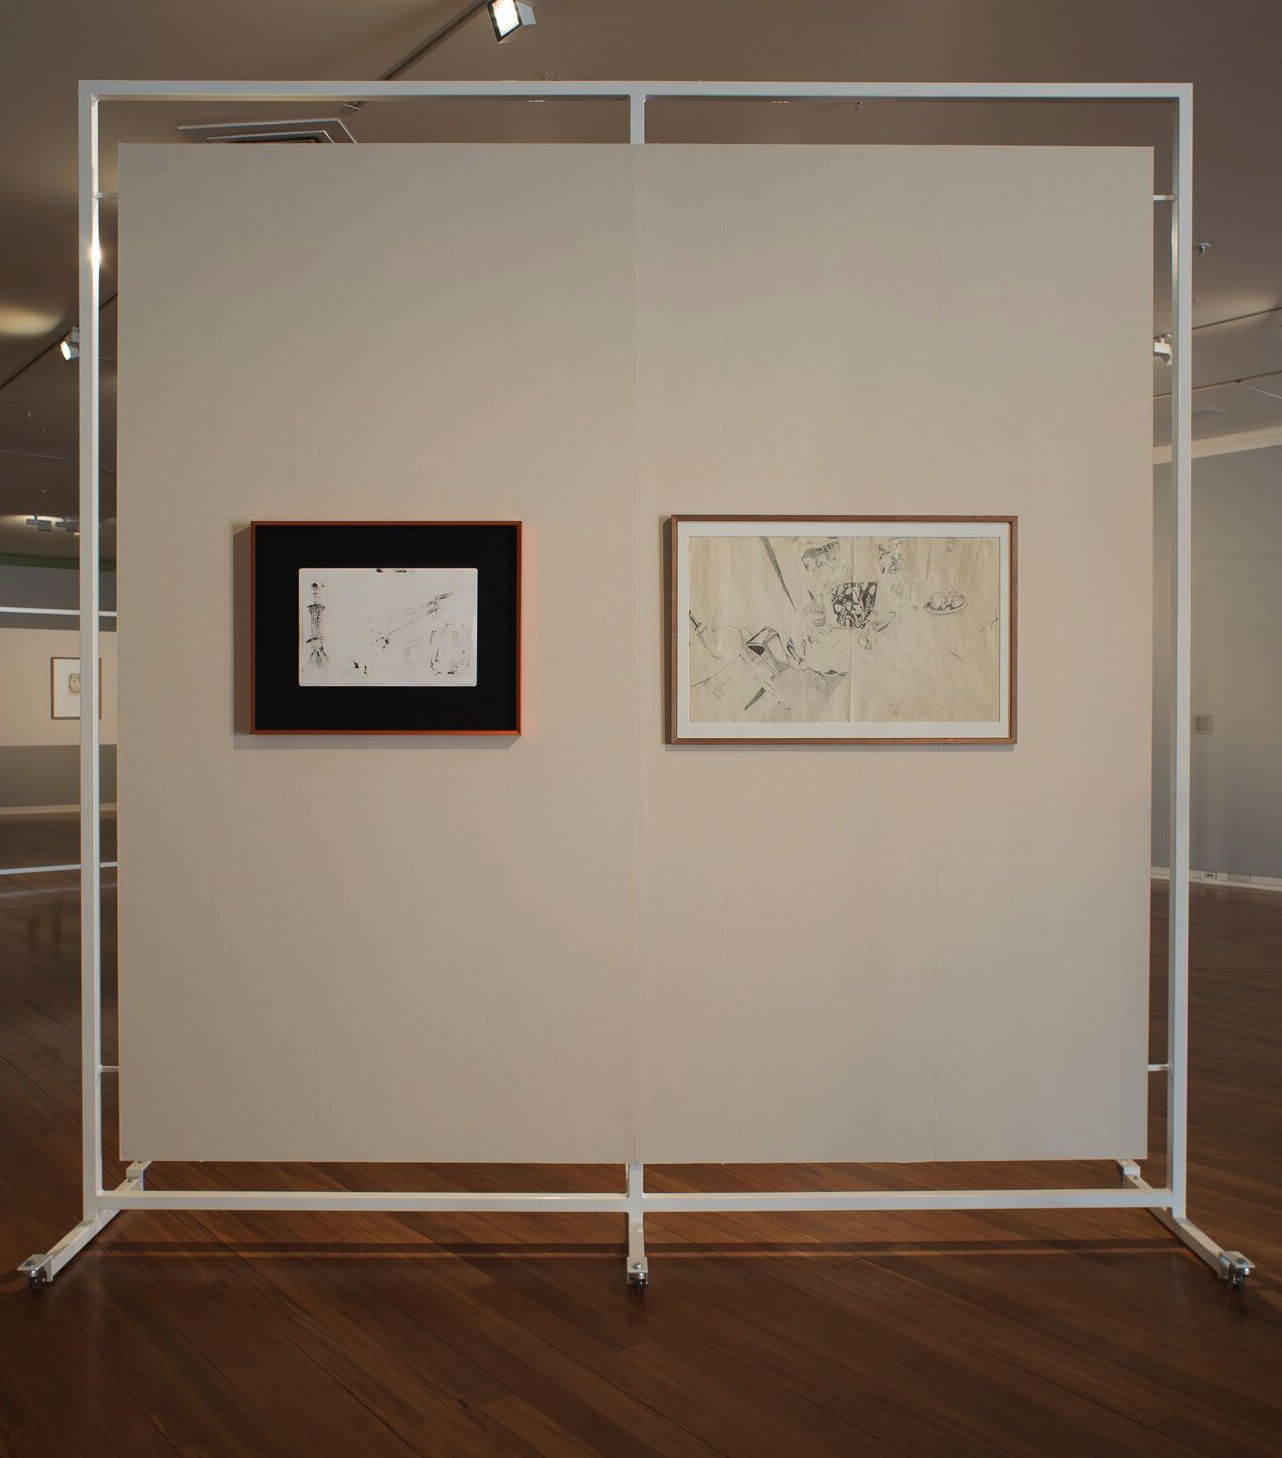 'On Sensitive Ground-shelf' and JMP's 'Untitled' drawing